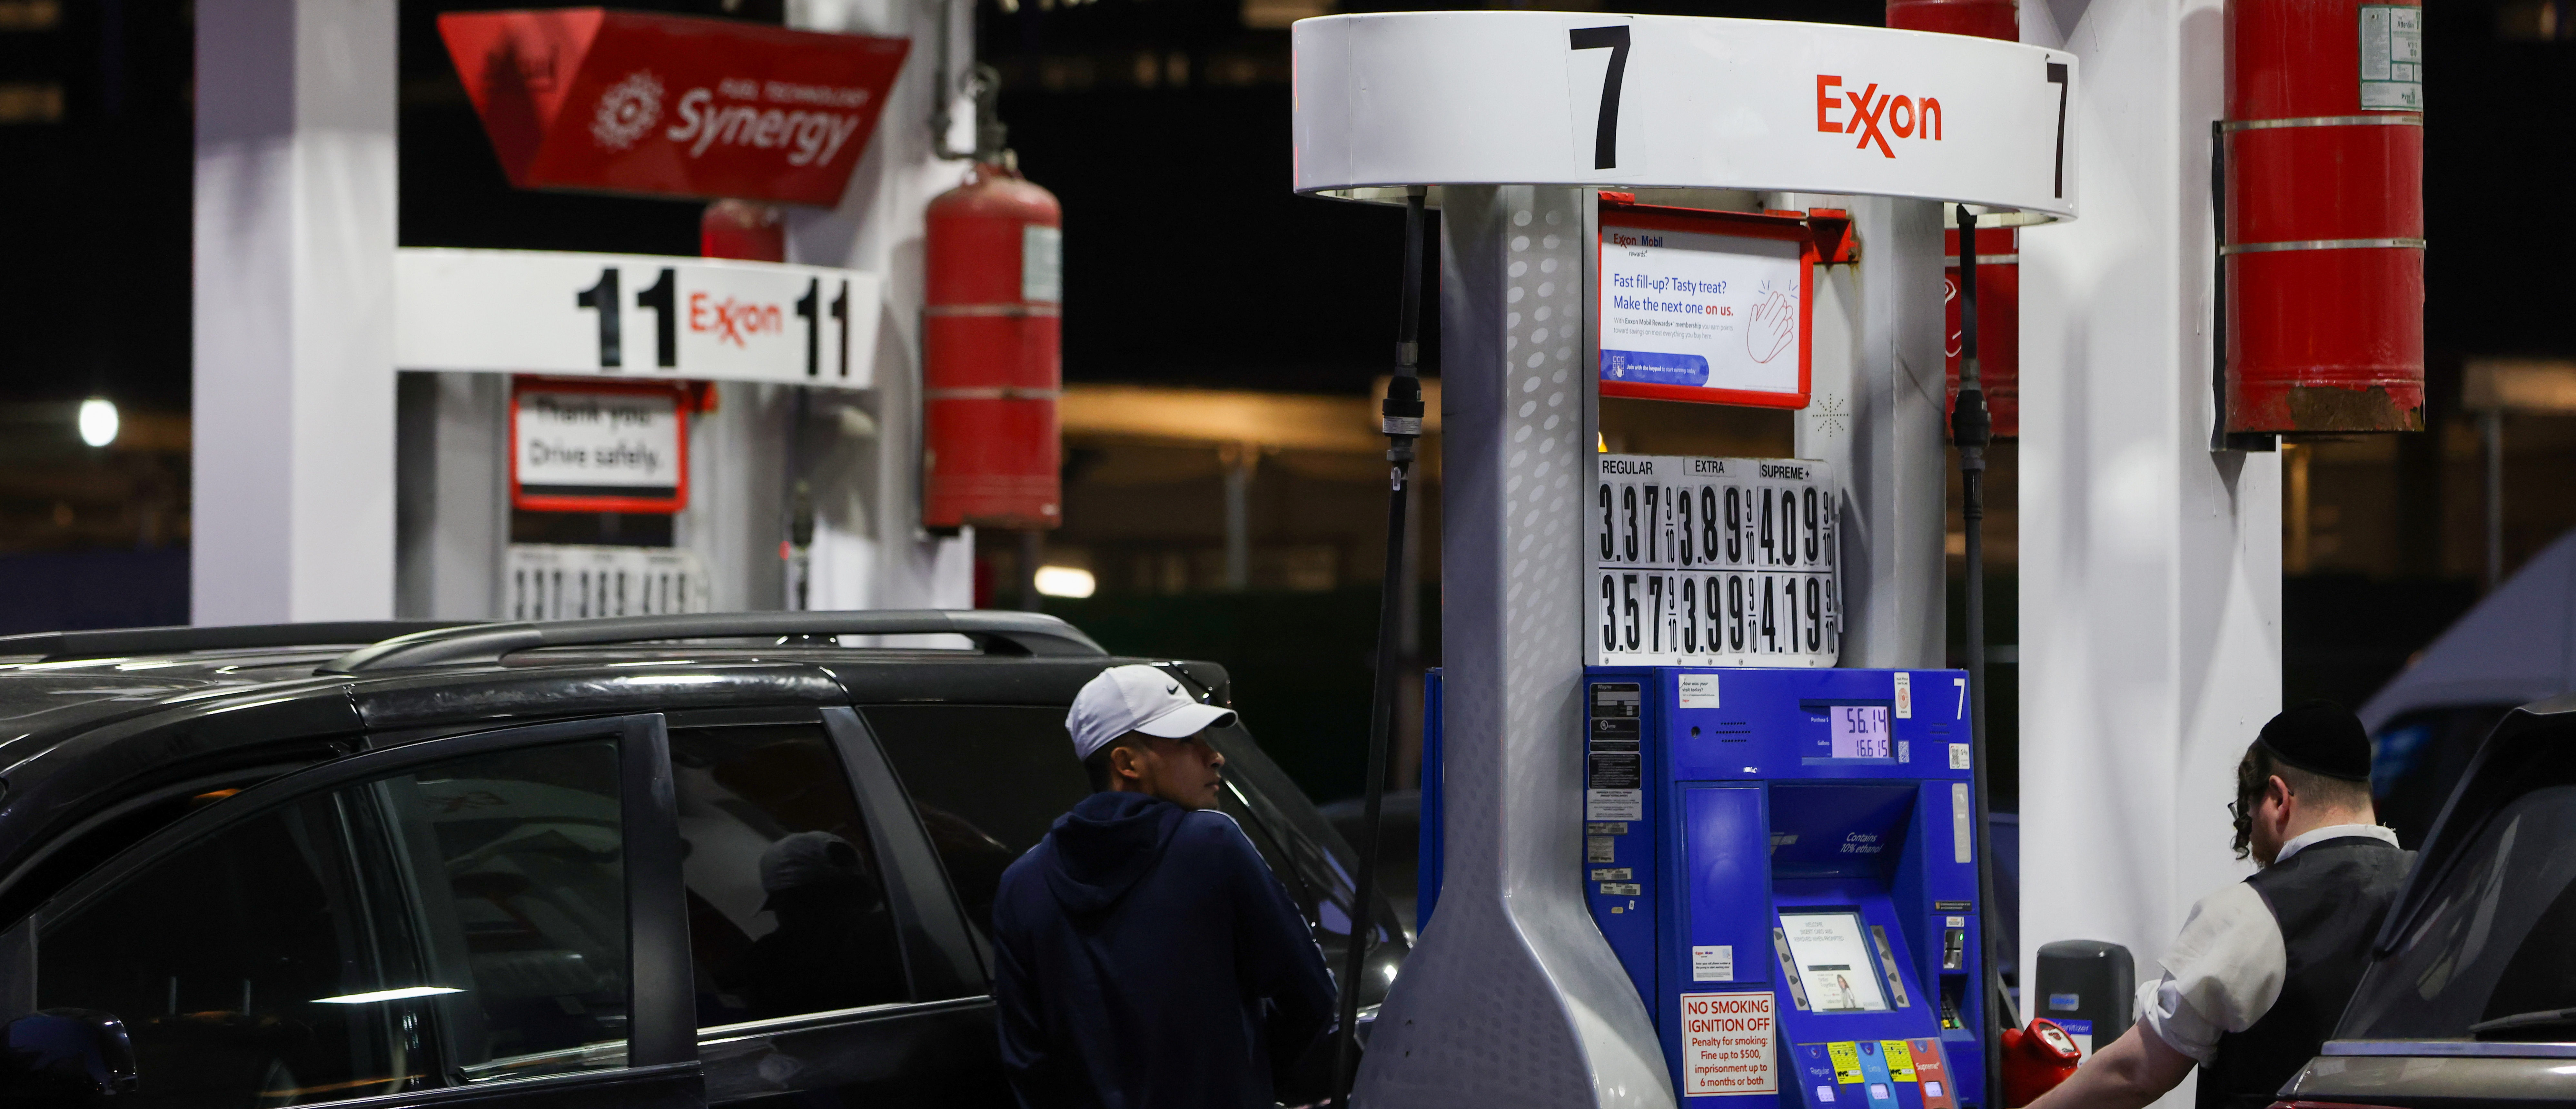 People pump gas at an Exxon gas station in Brooklyn, New York City, U.S., November 23, 2021. REUTERS/Andrew Kelly